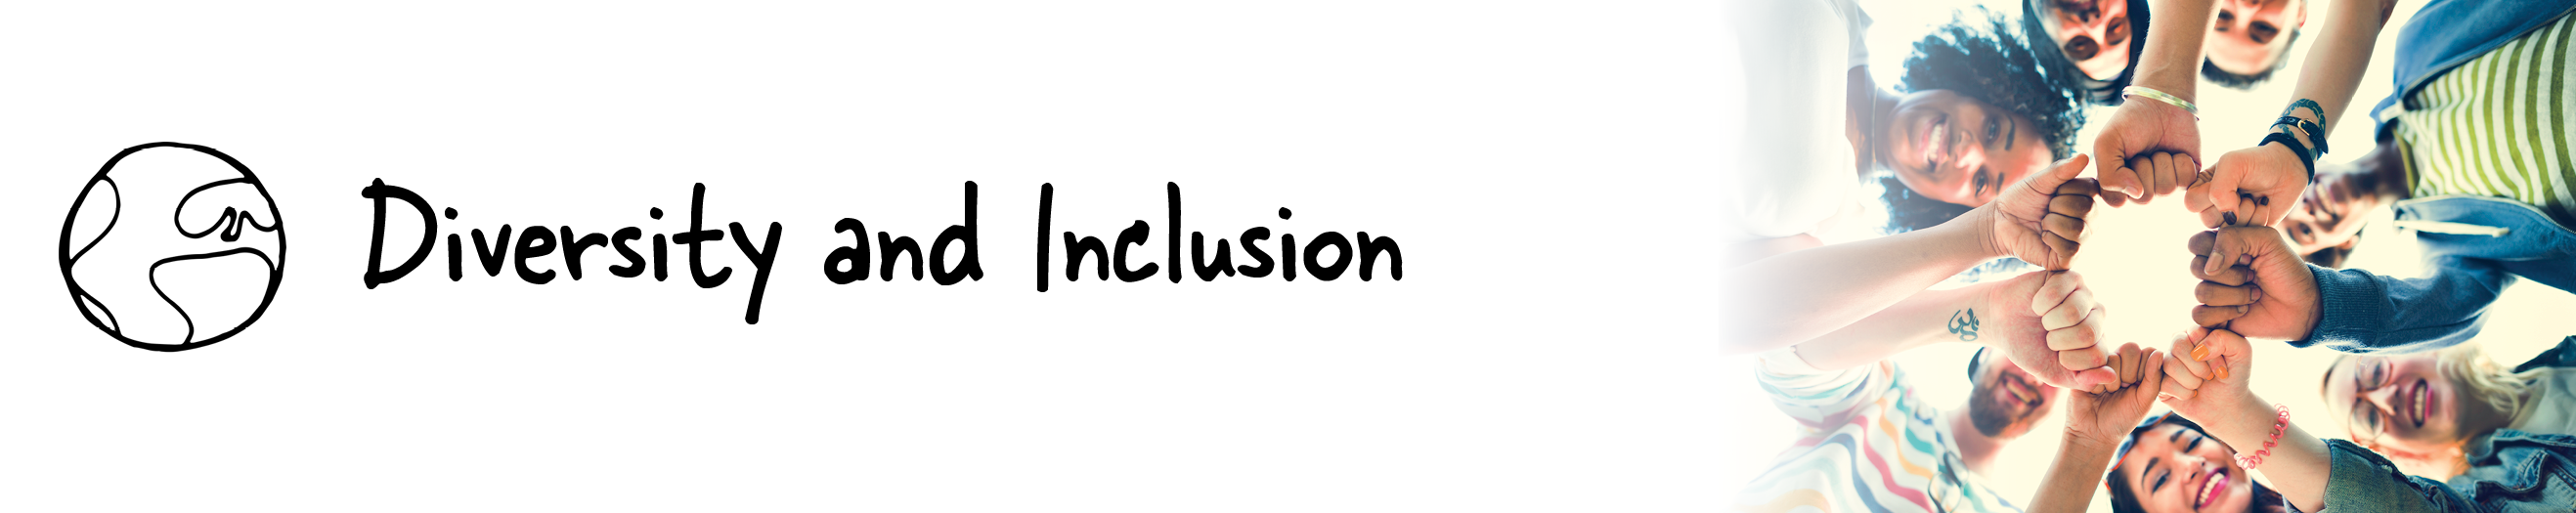 HR Diversity and Inclusion 